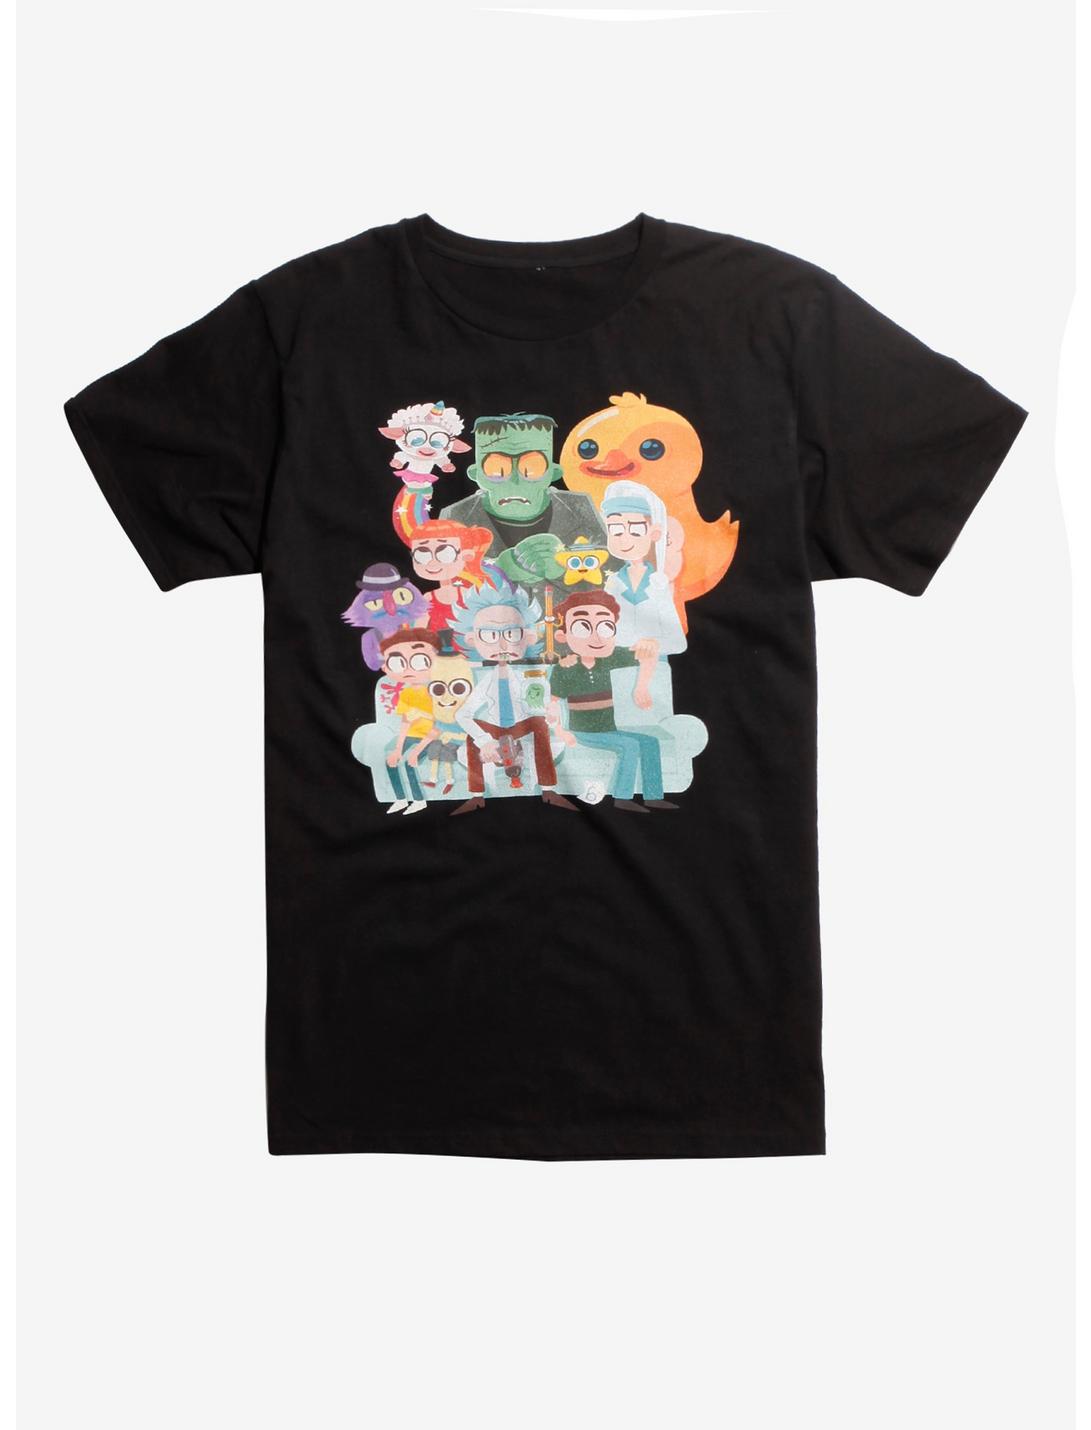 Rick And Morty Thanks Mr. Poopy Butthole T-Shirt, BLACK, hi-res